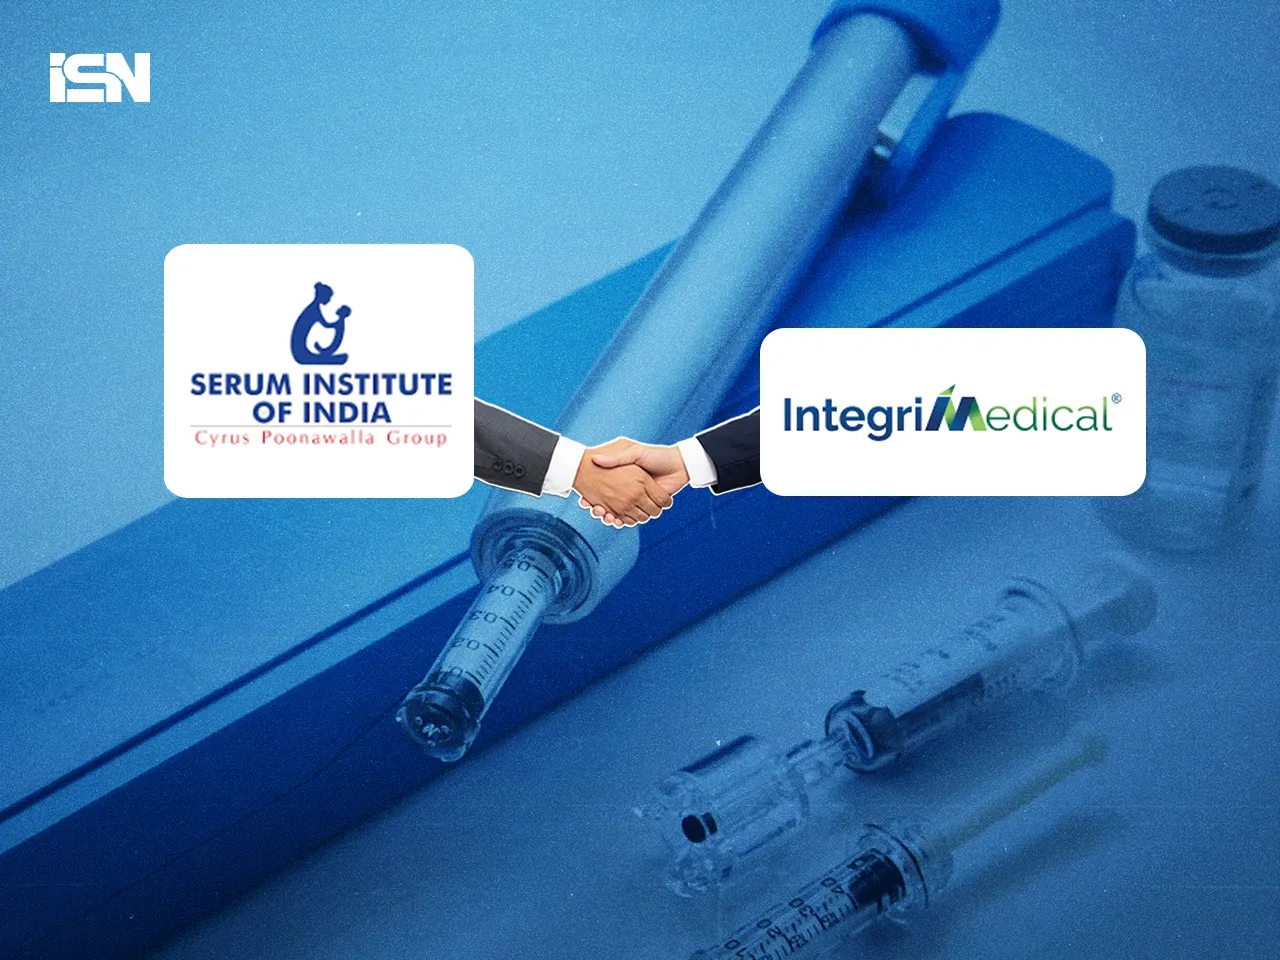 Serum Institute of India acquires 20% stake in IntegriMedical to advance Needle Free Injection System technology